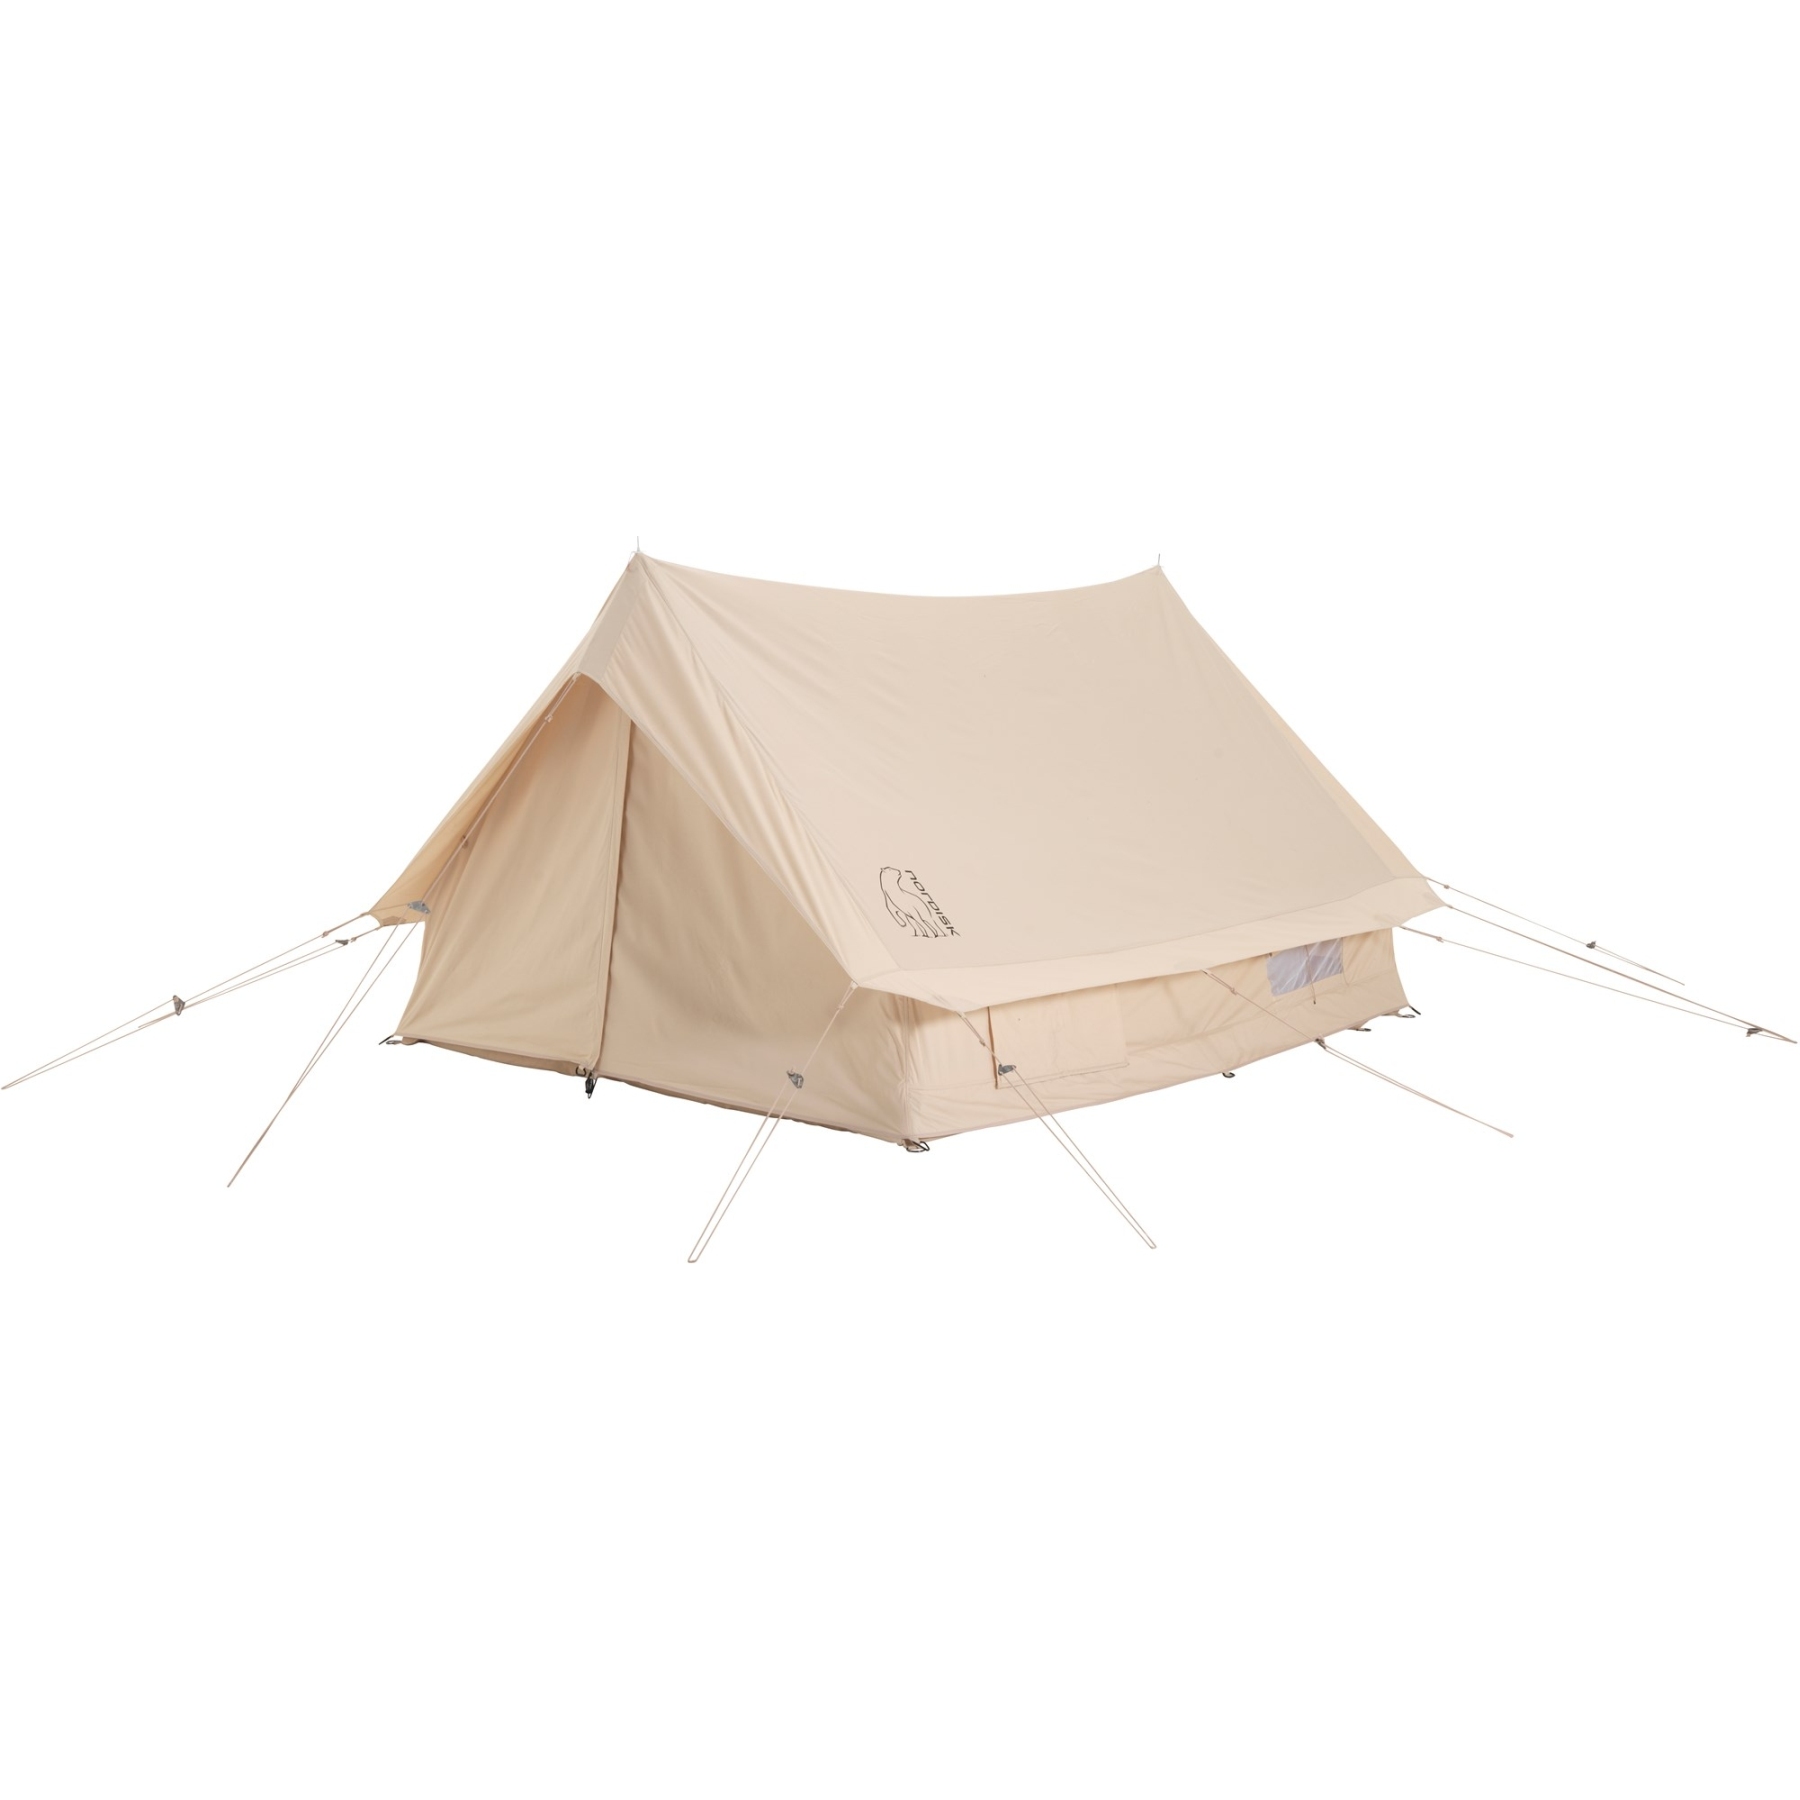 Picture of Nordisk Ydun 5.5 Tent - natural